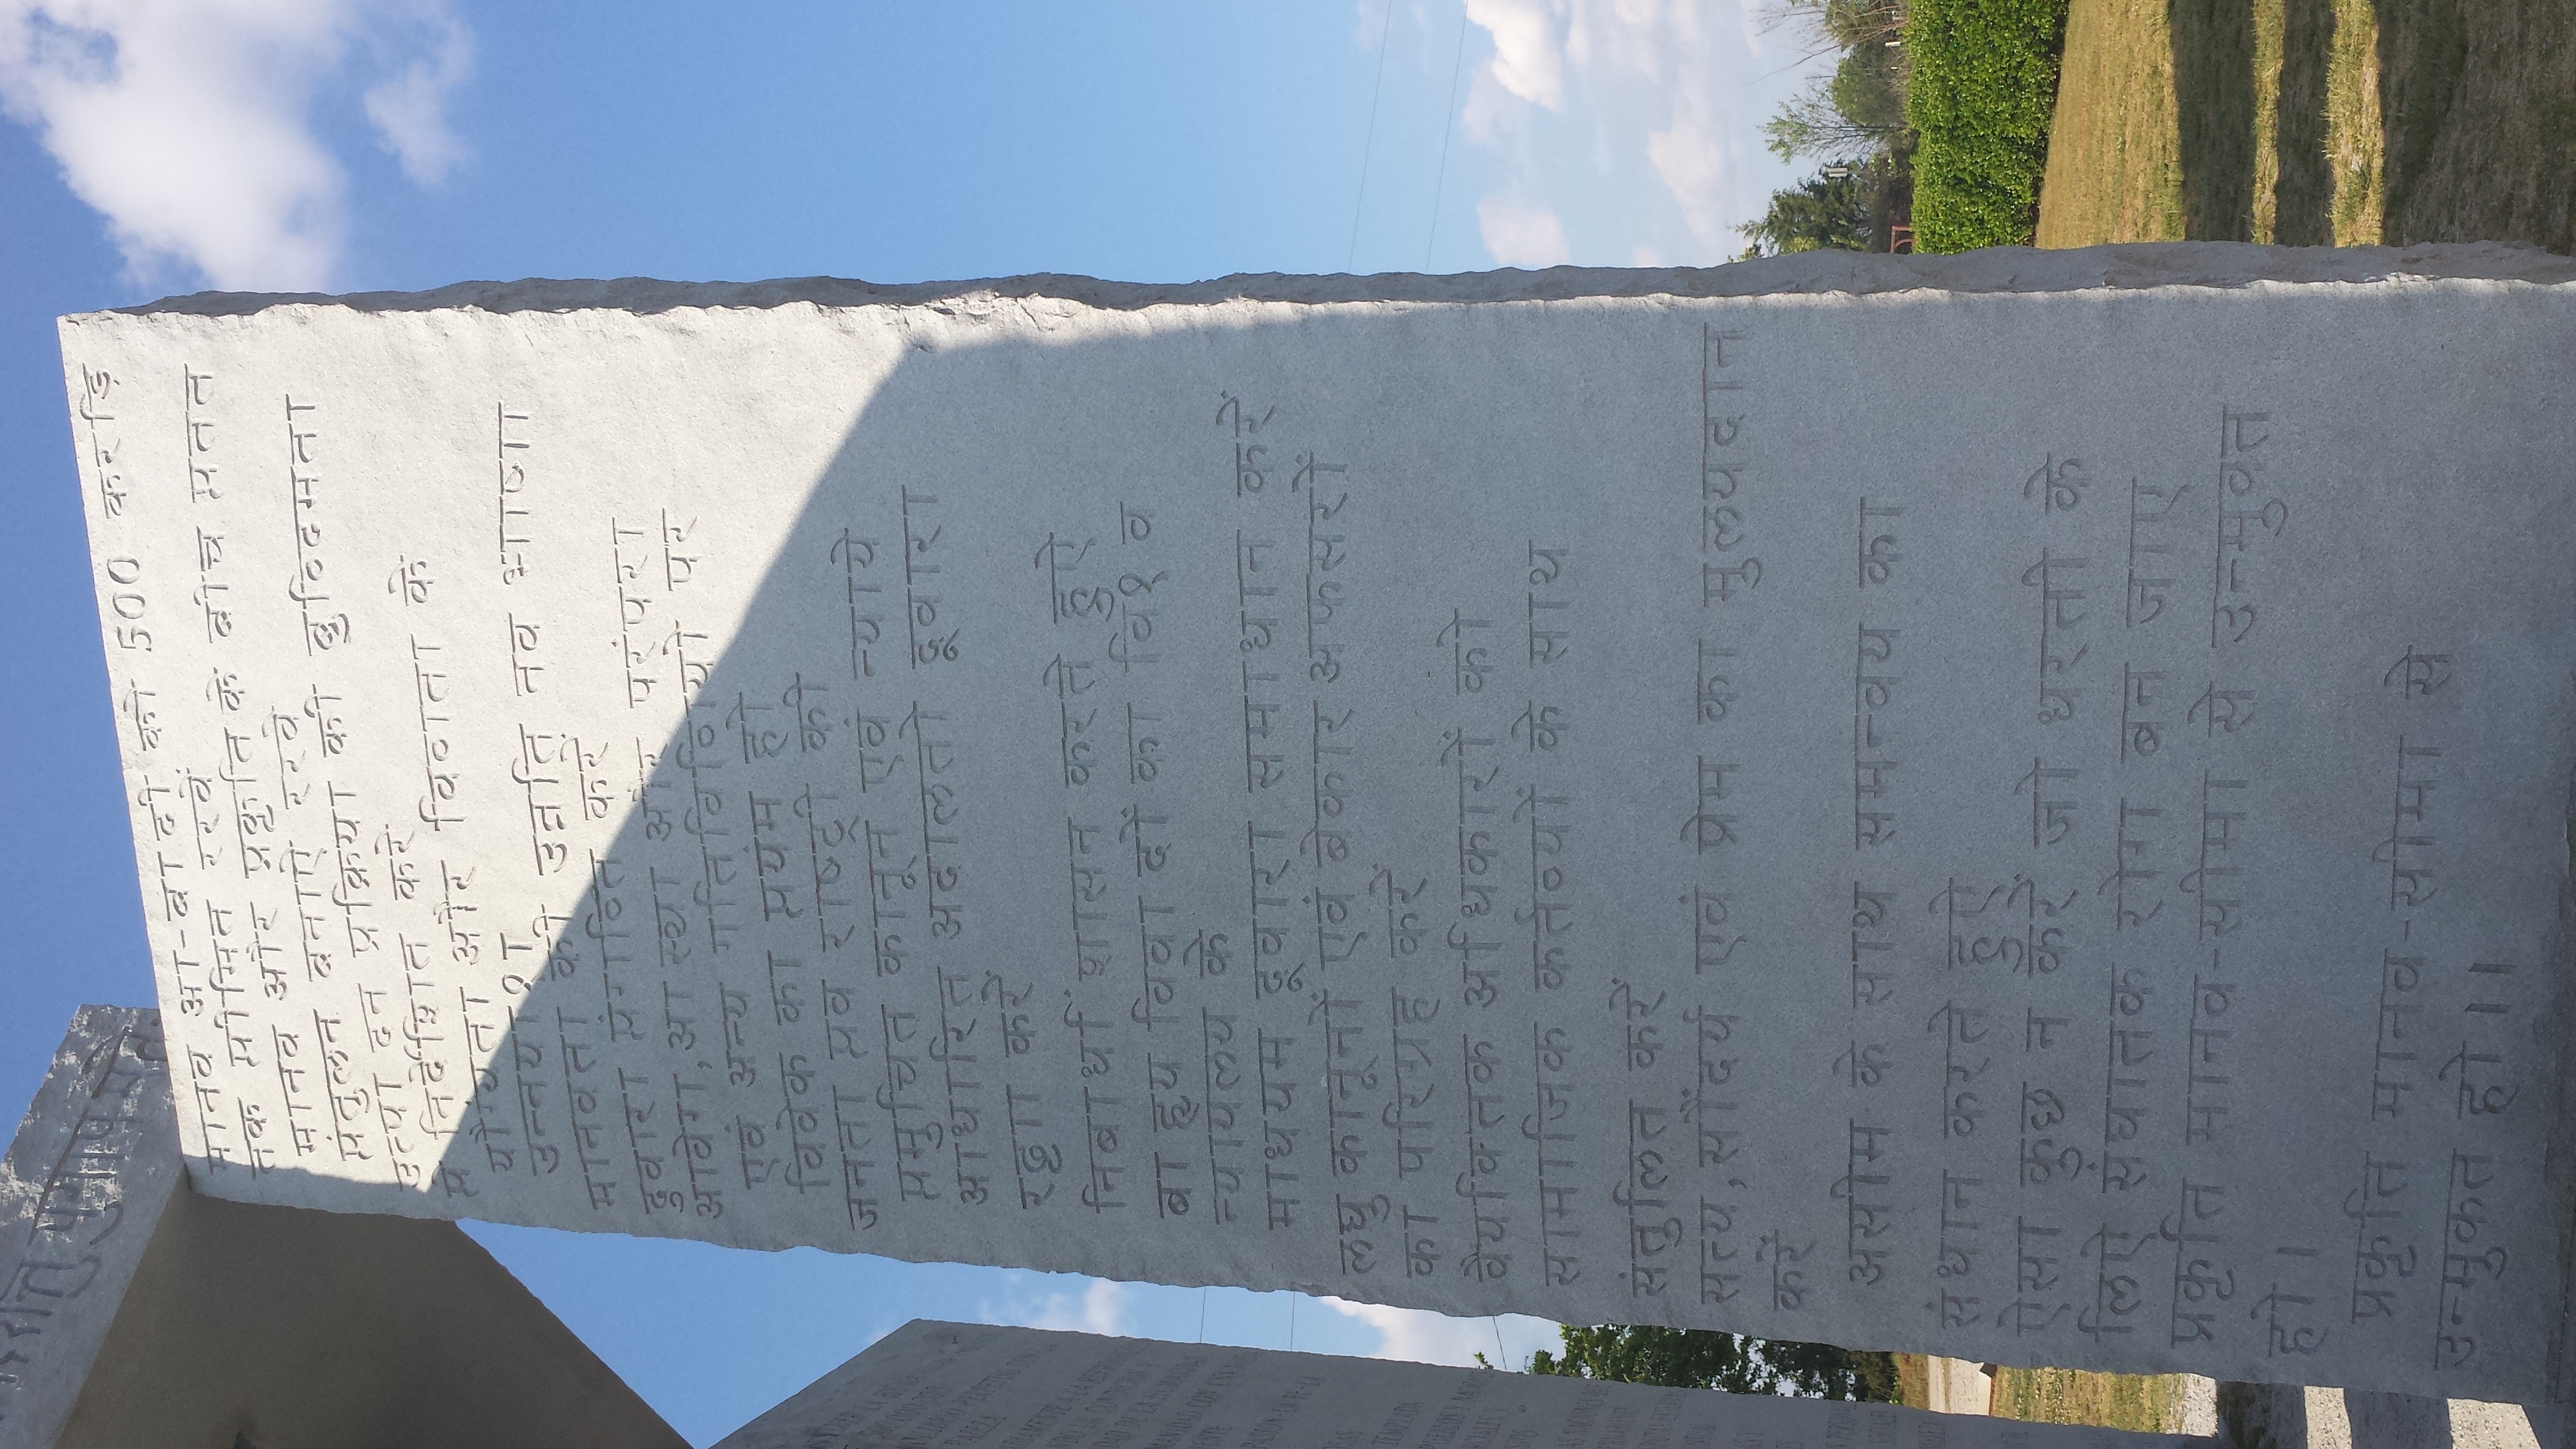 What are the Georgia Guidestones? Pictures and Facts | Student Handouts